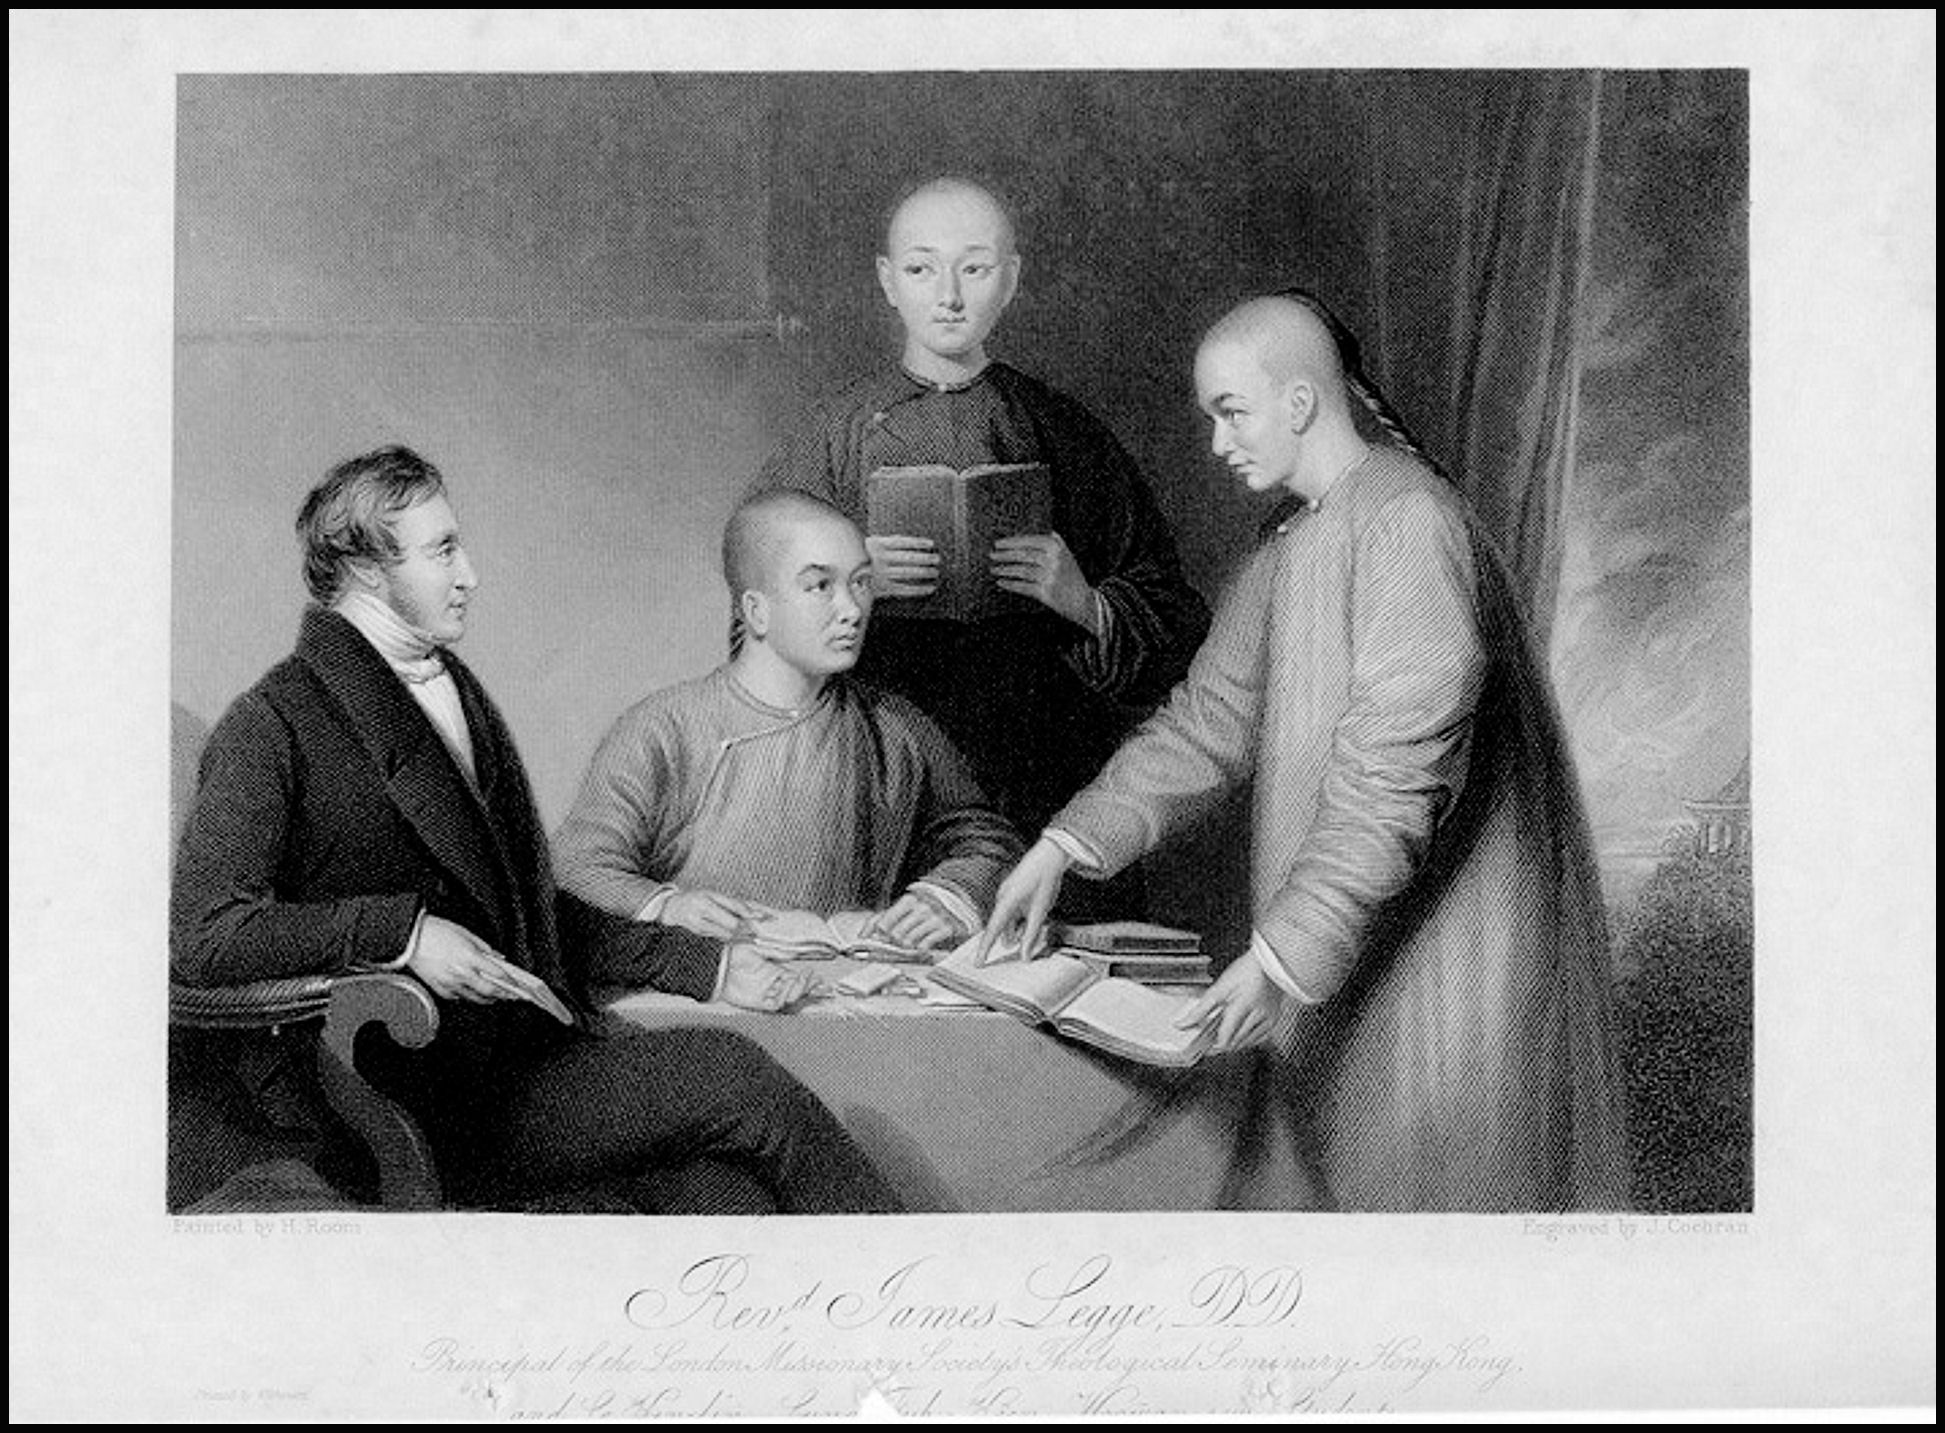 A black and white sketch of James Legge and the three Chinese students. The group looks like they are working on books.